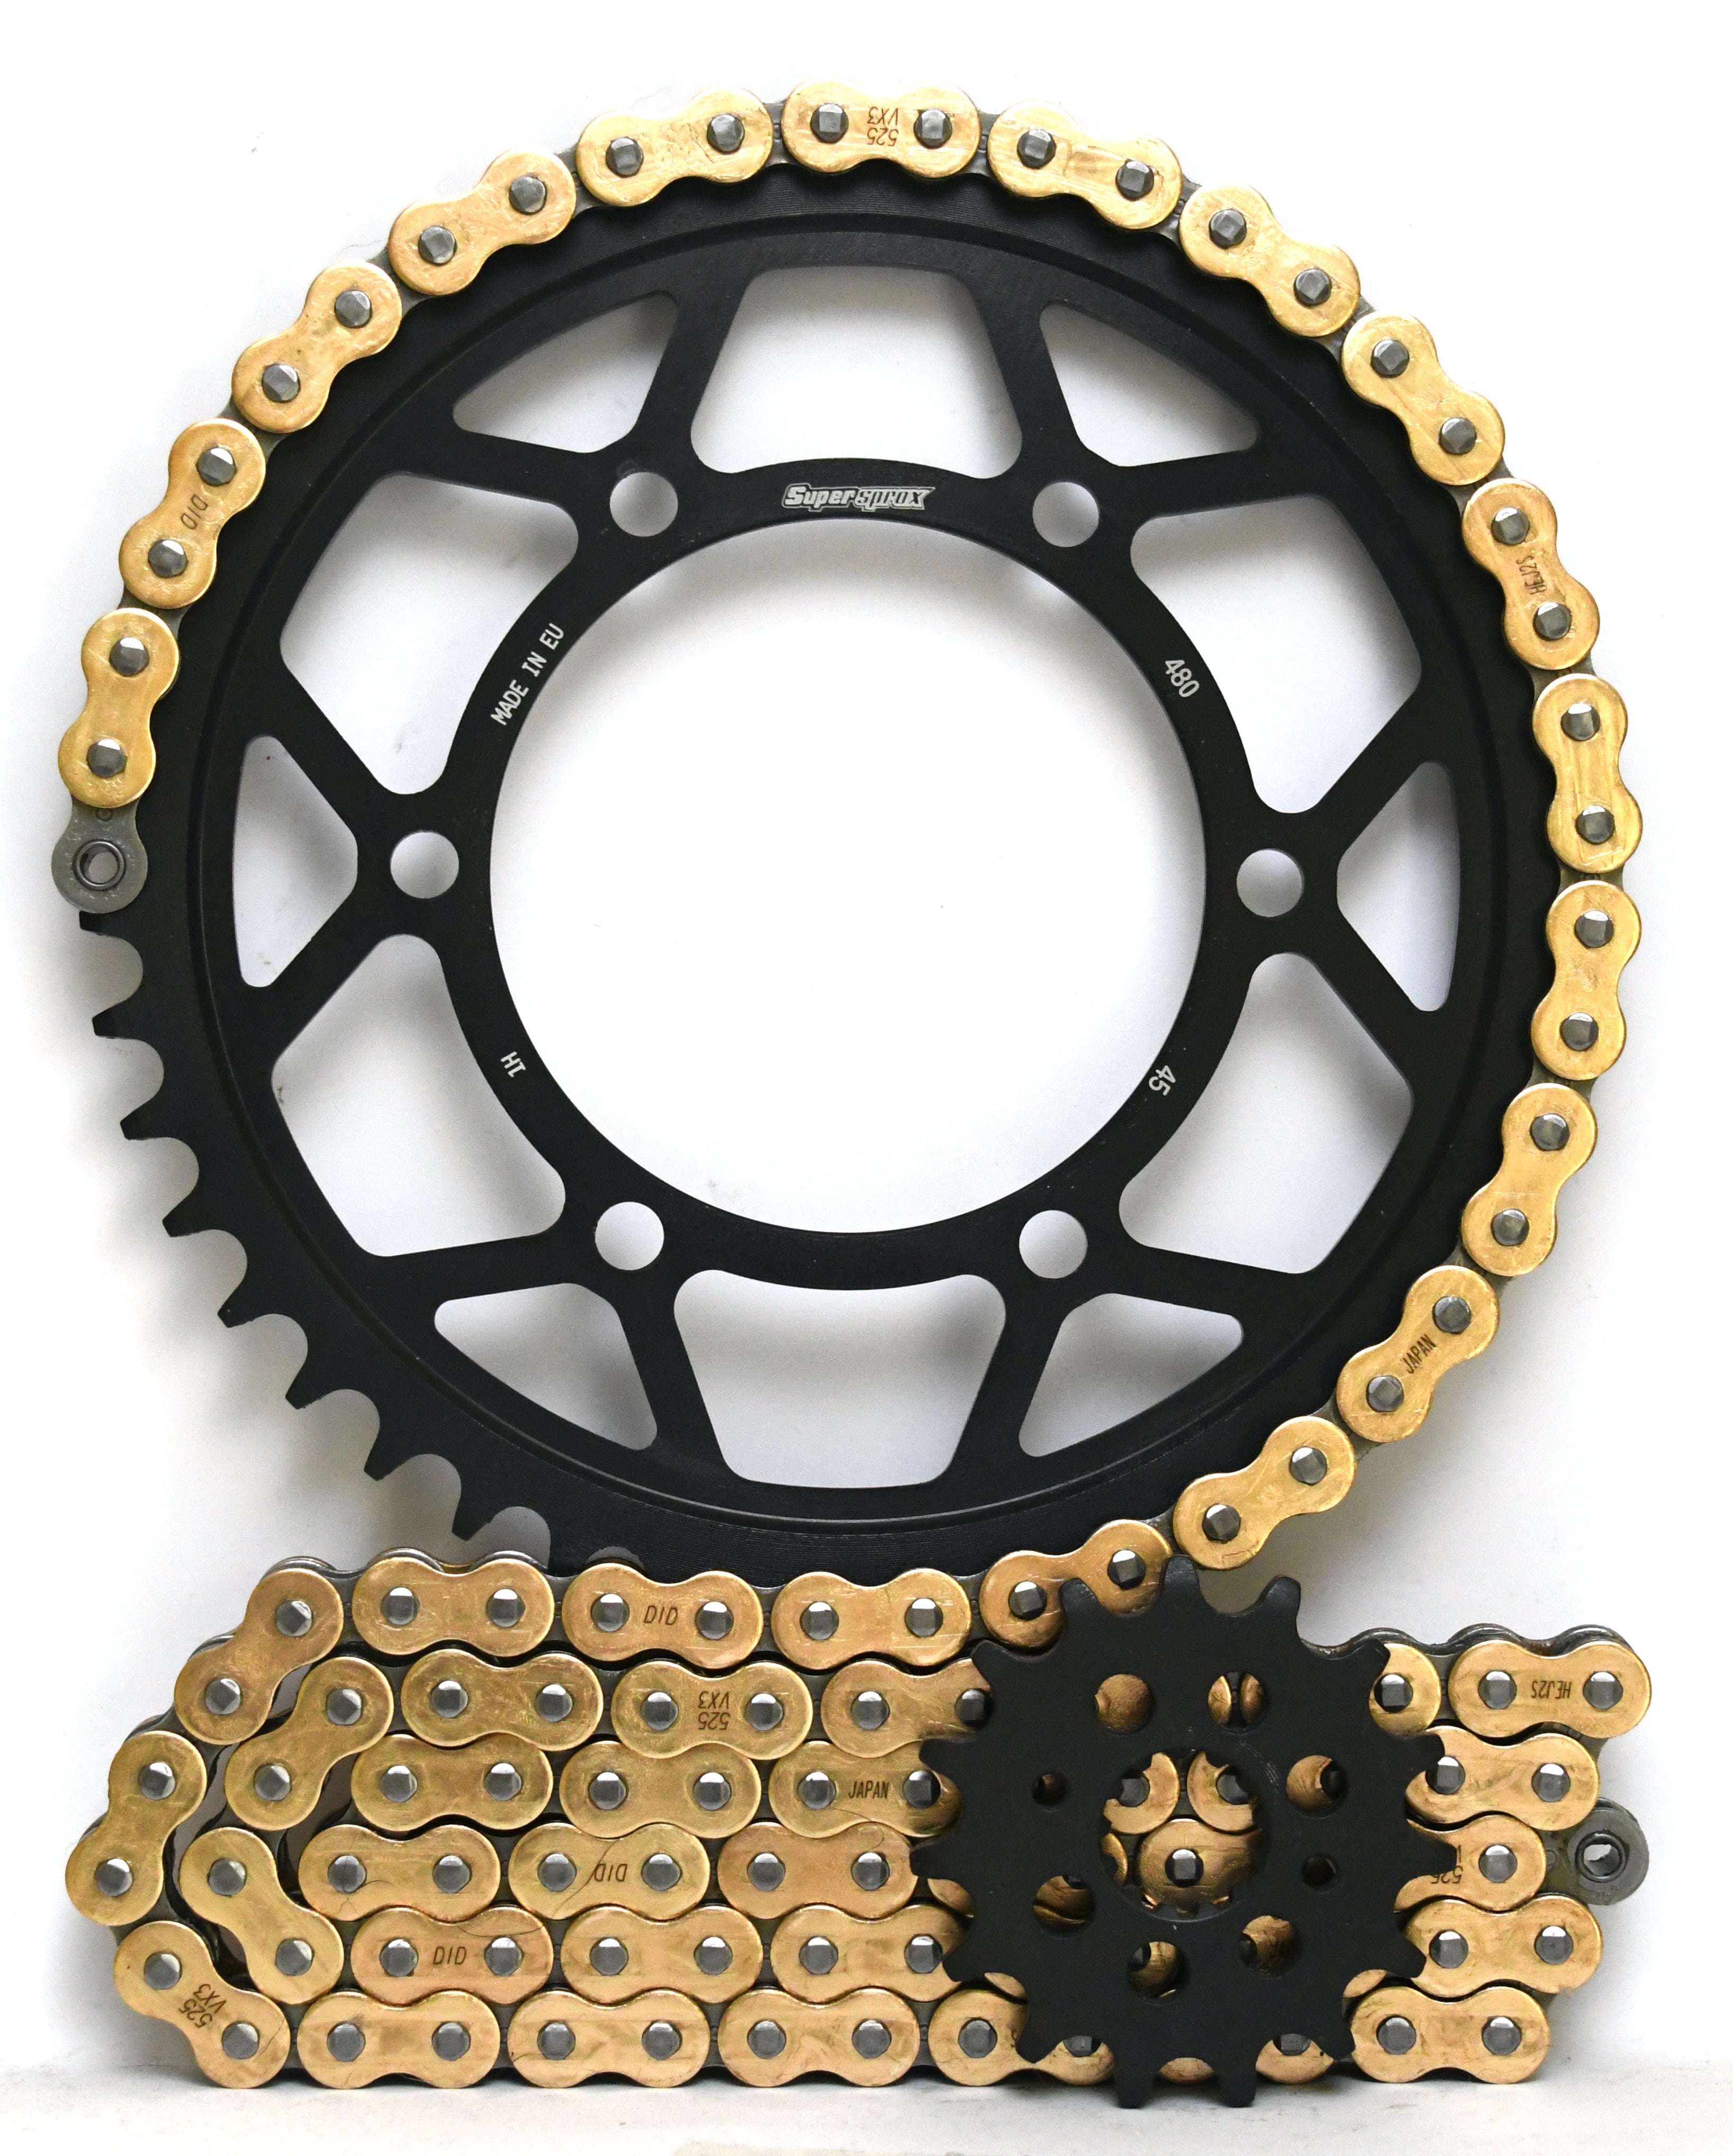 Supersprox Chain & Steel Sprocket Kit for Yamaha YZF R1 2009-2014 - Standard Gearing